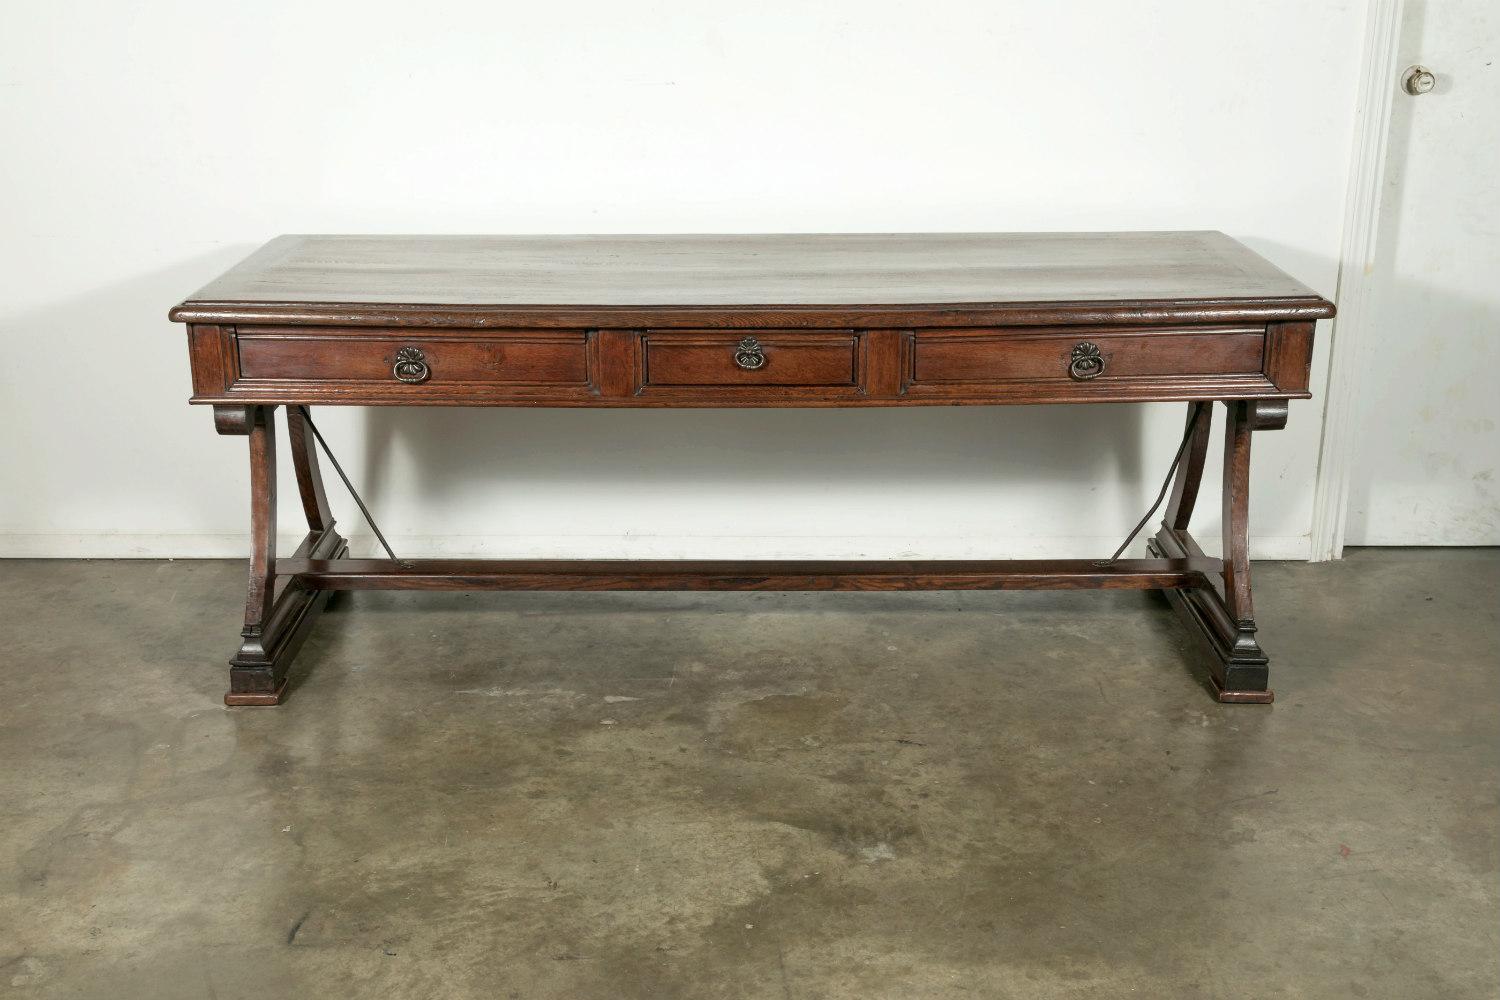 French Provincial Early 19th Century Solid Oak French Provencal Writing Table or Console